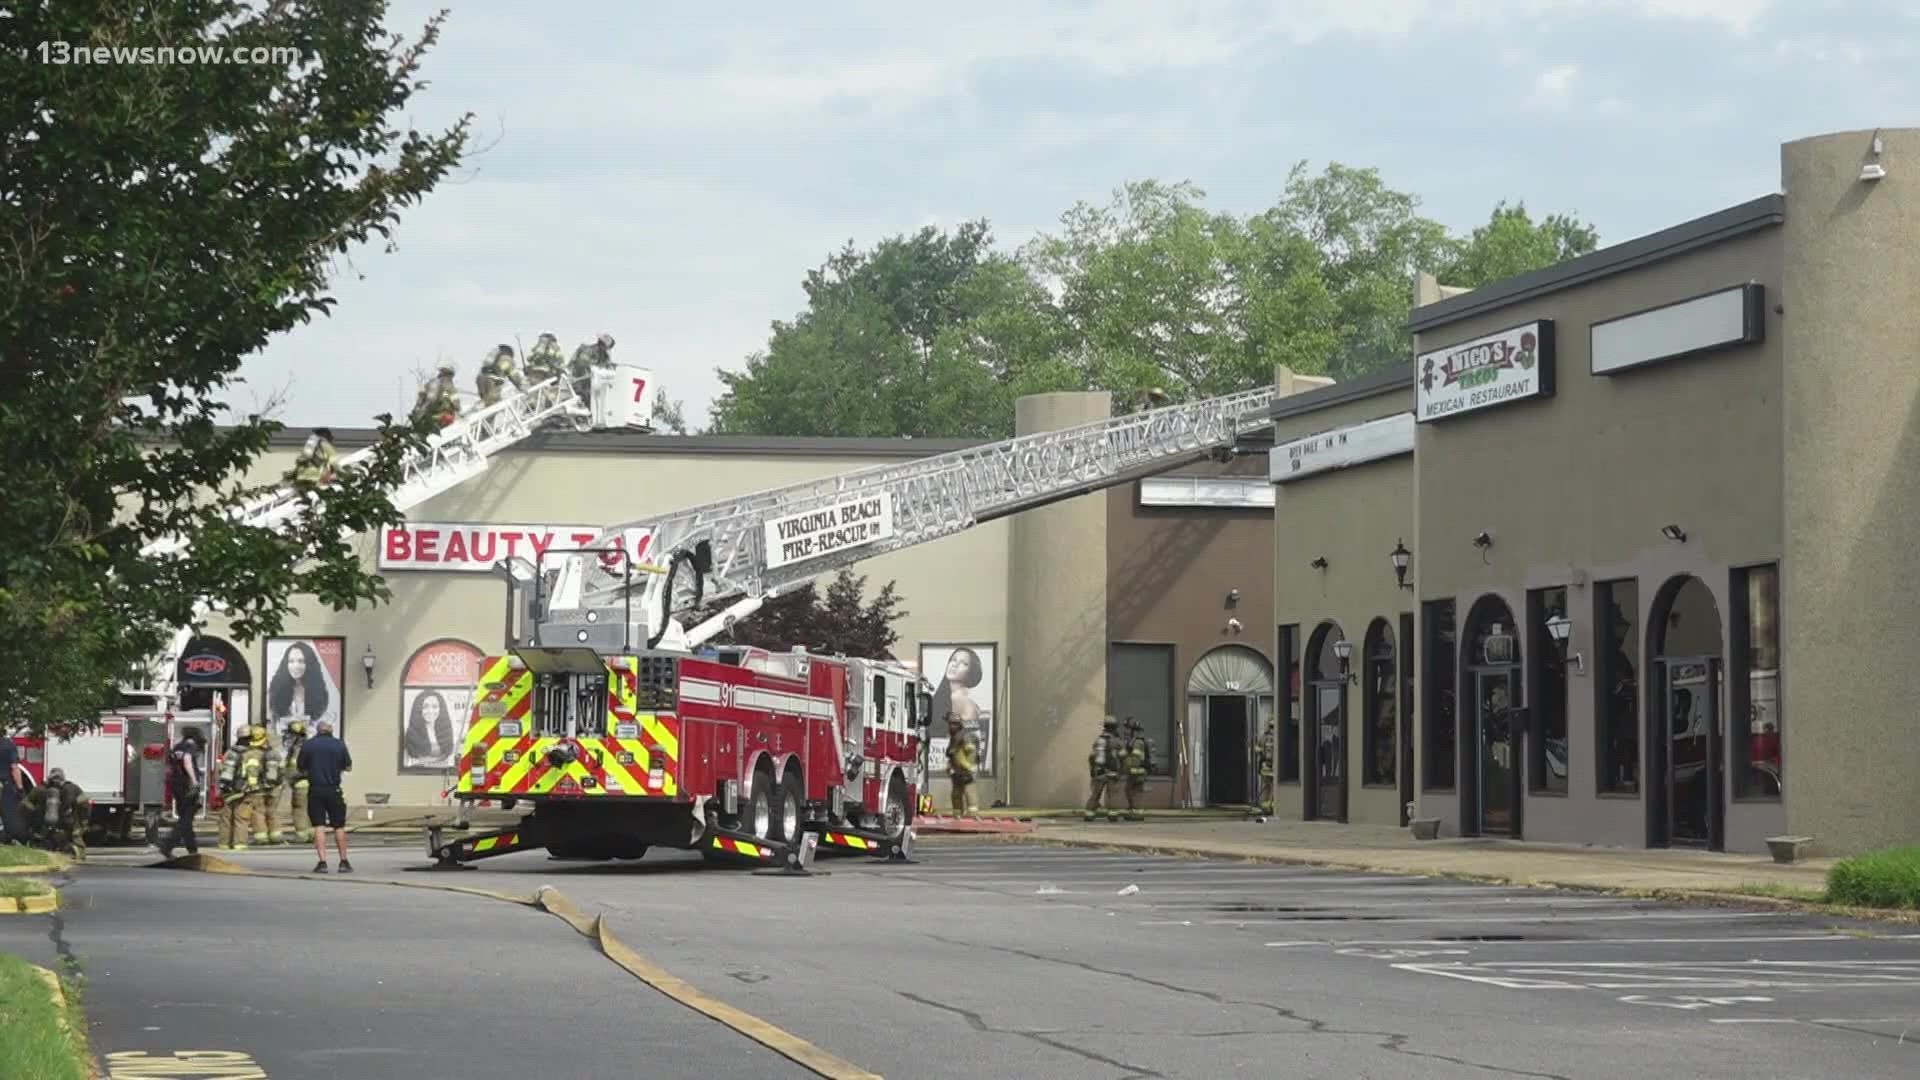 Five Virginia Beach businesses on the 3900 block of Holland Road were damaged in a fire. One of the businesses is considered to have taken extensive smoke damage.